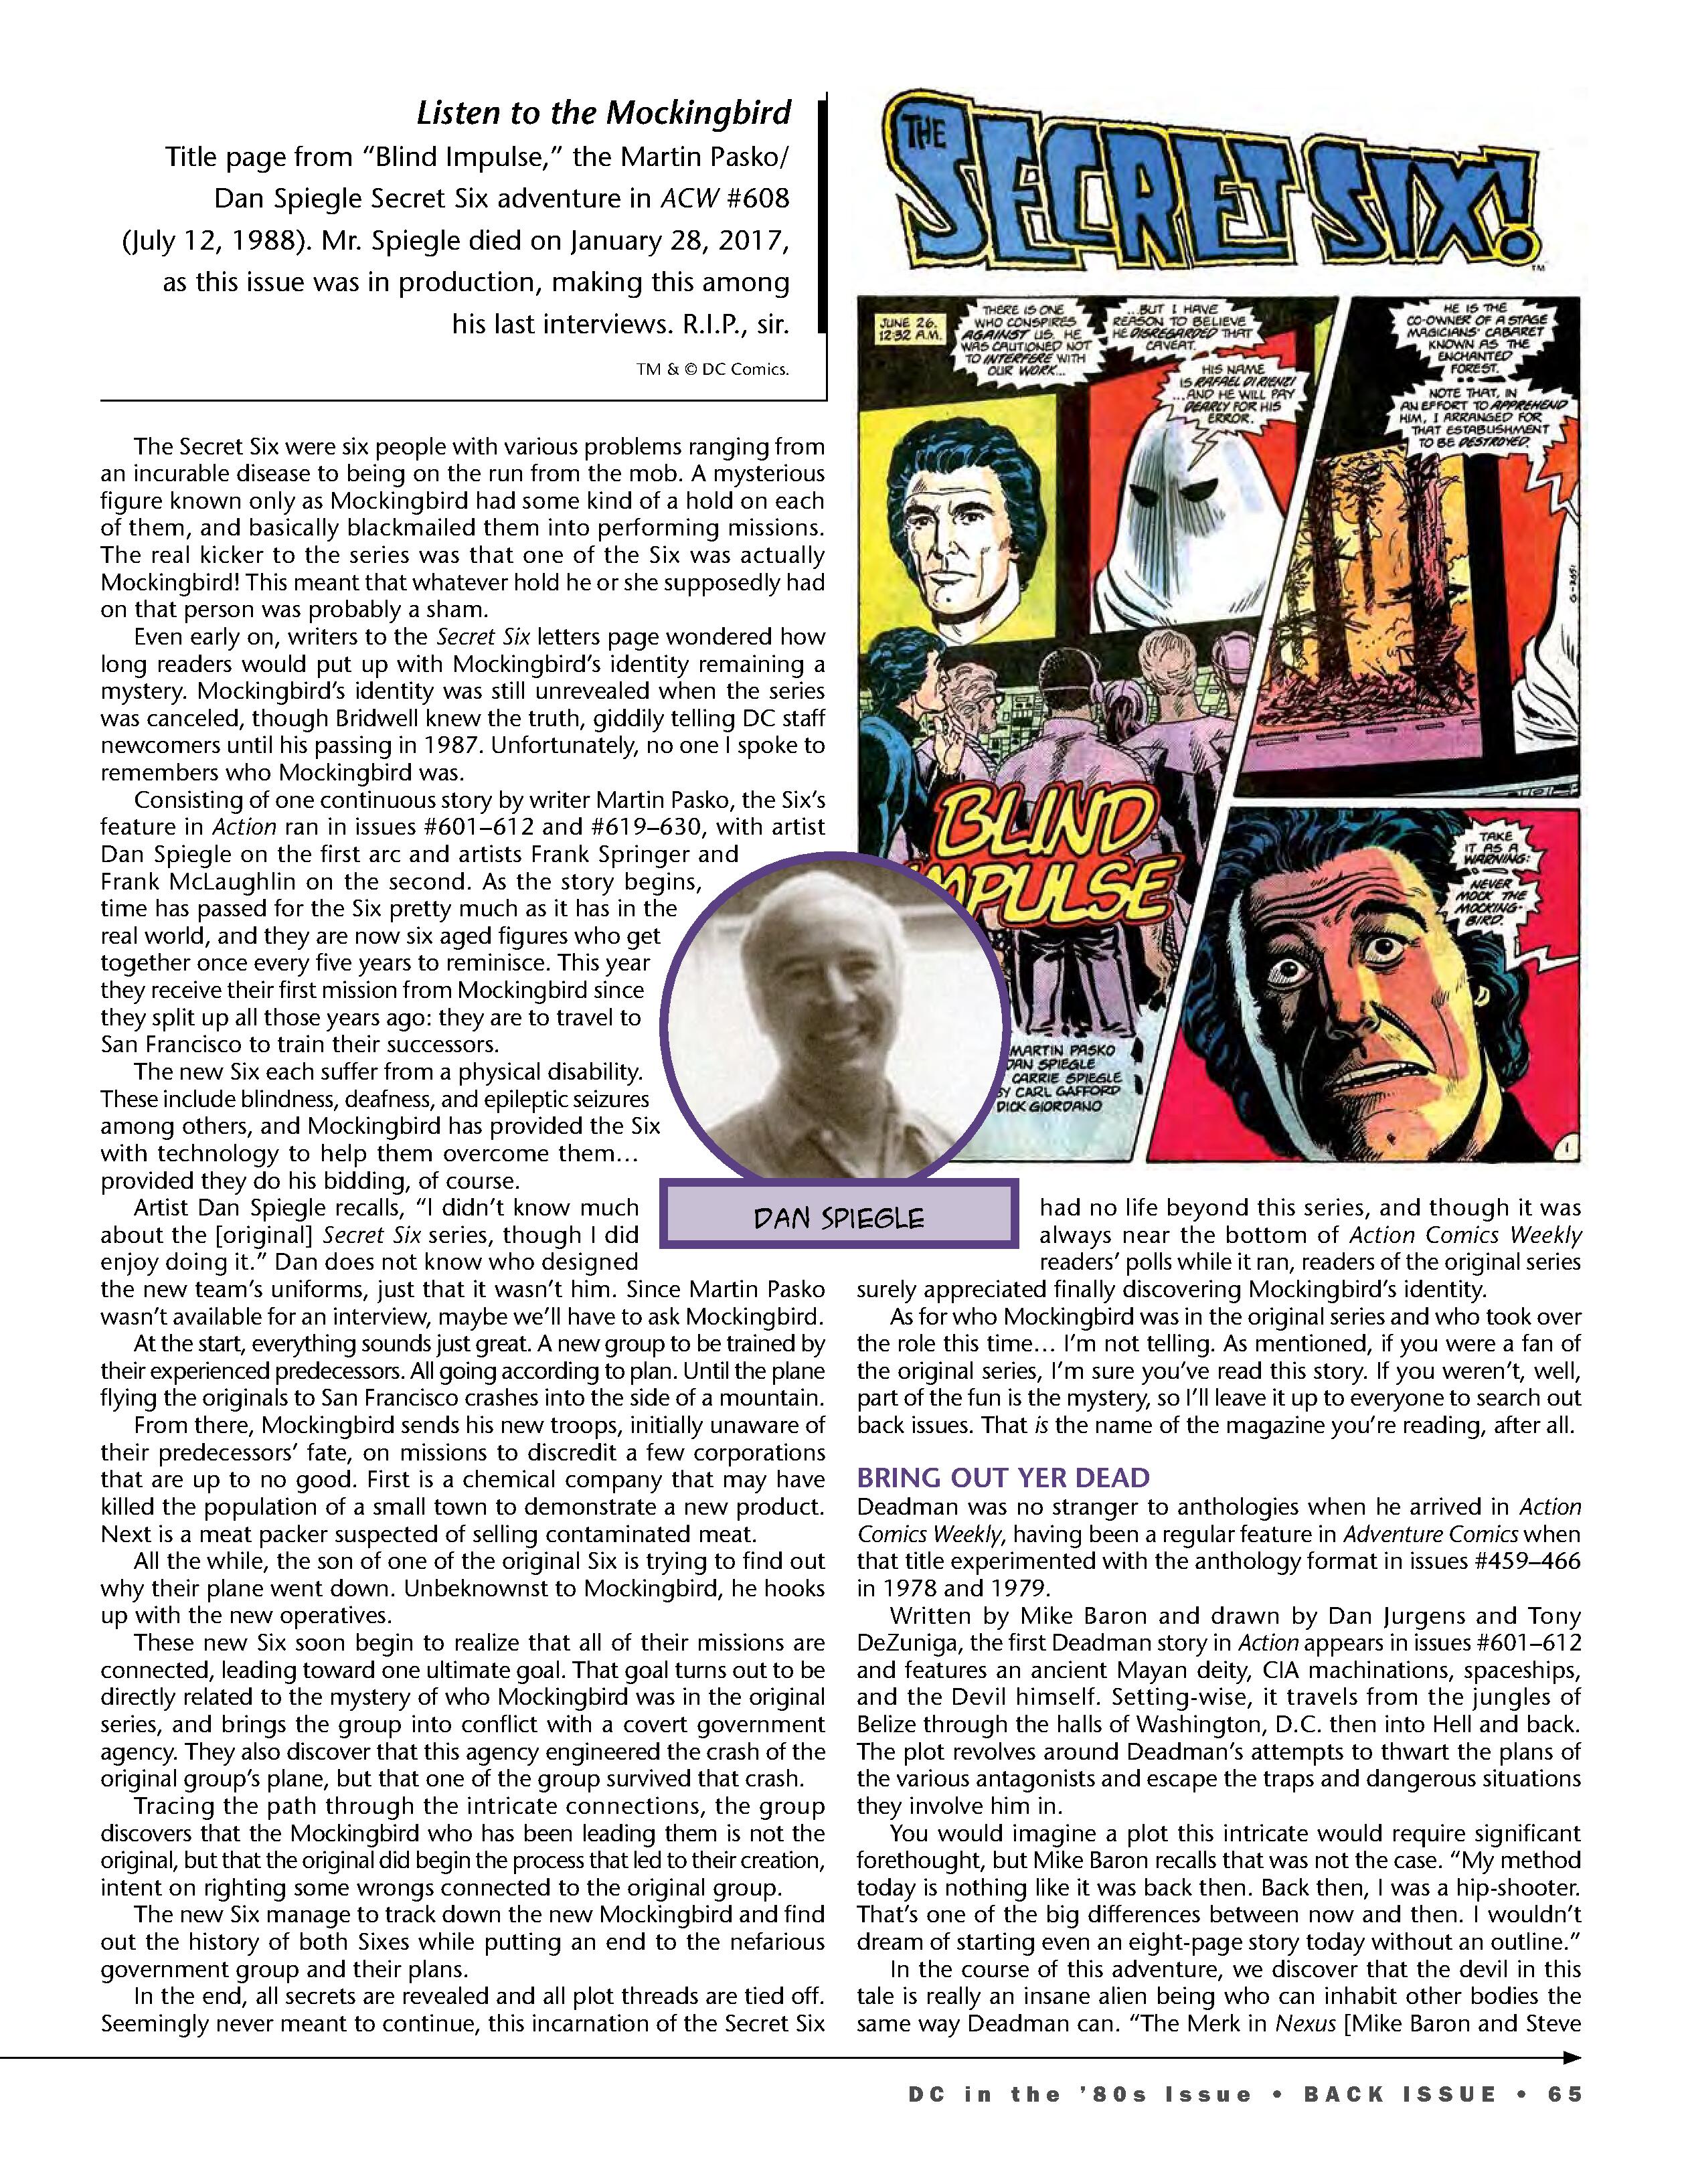 Read online Back Issue comic -  Issue #98 - 67